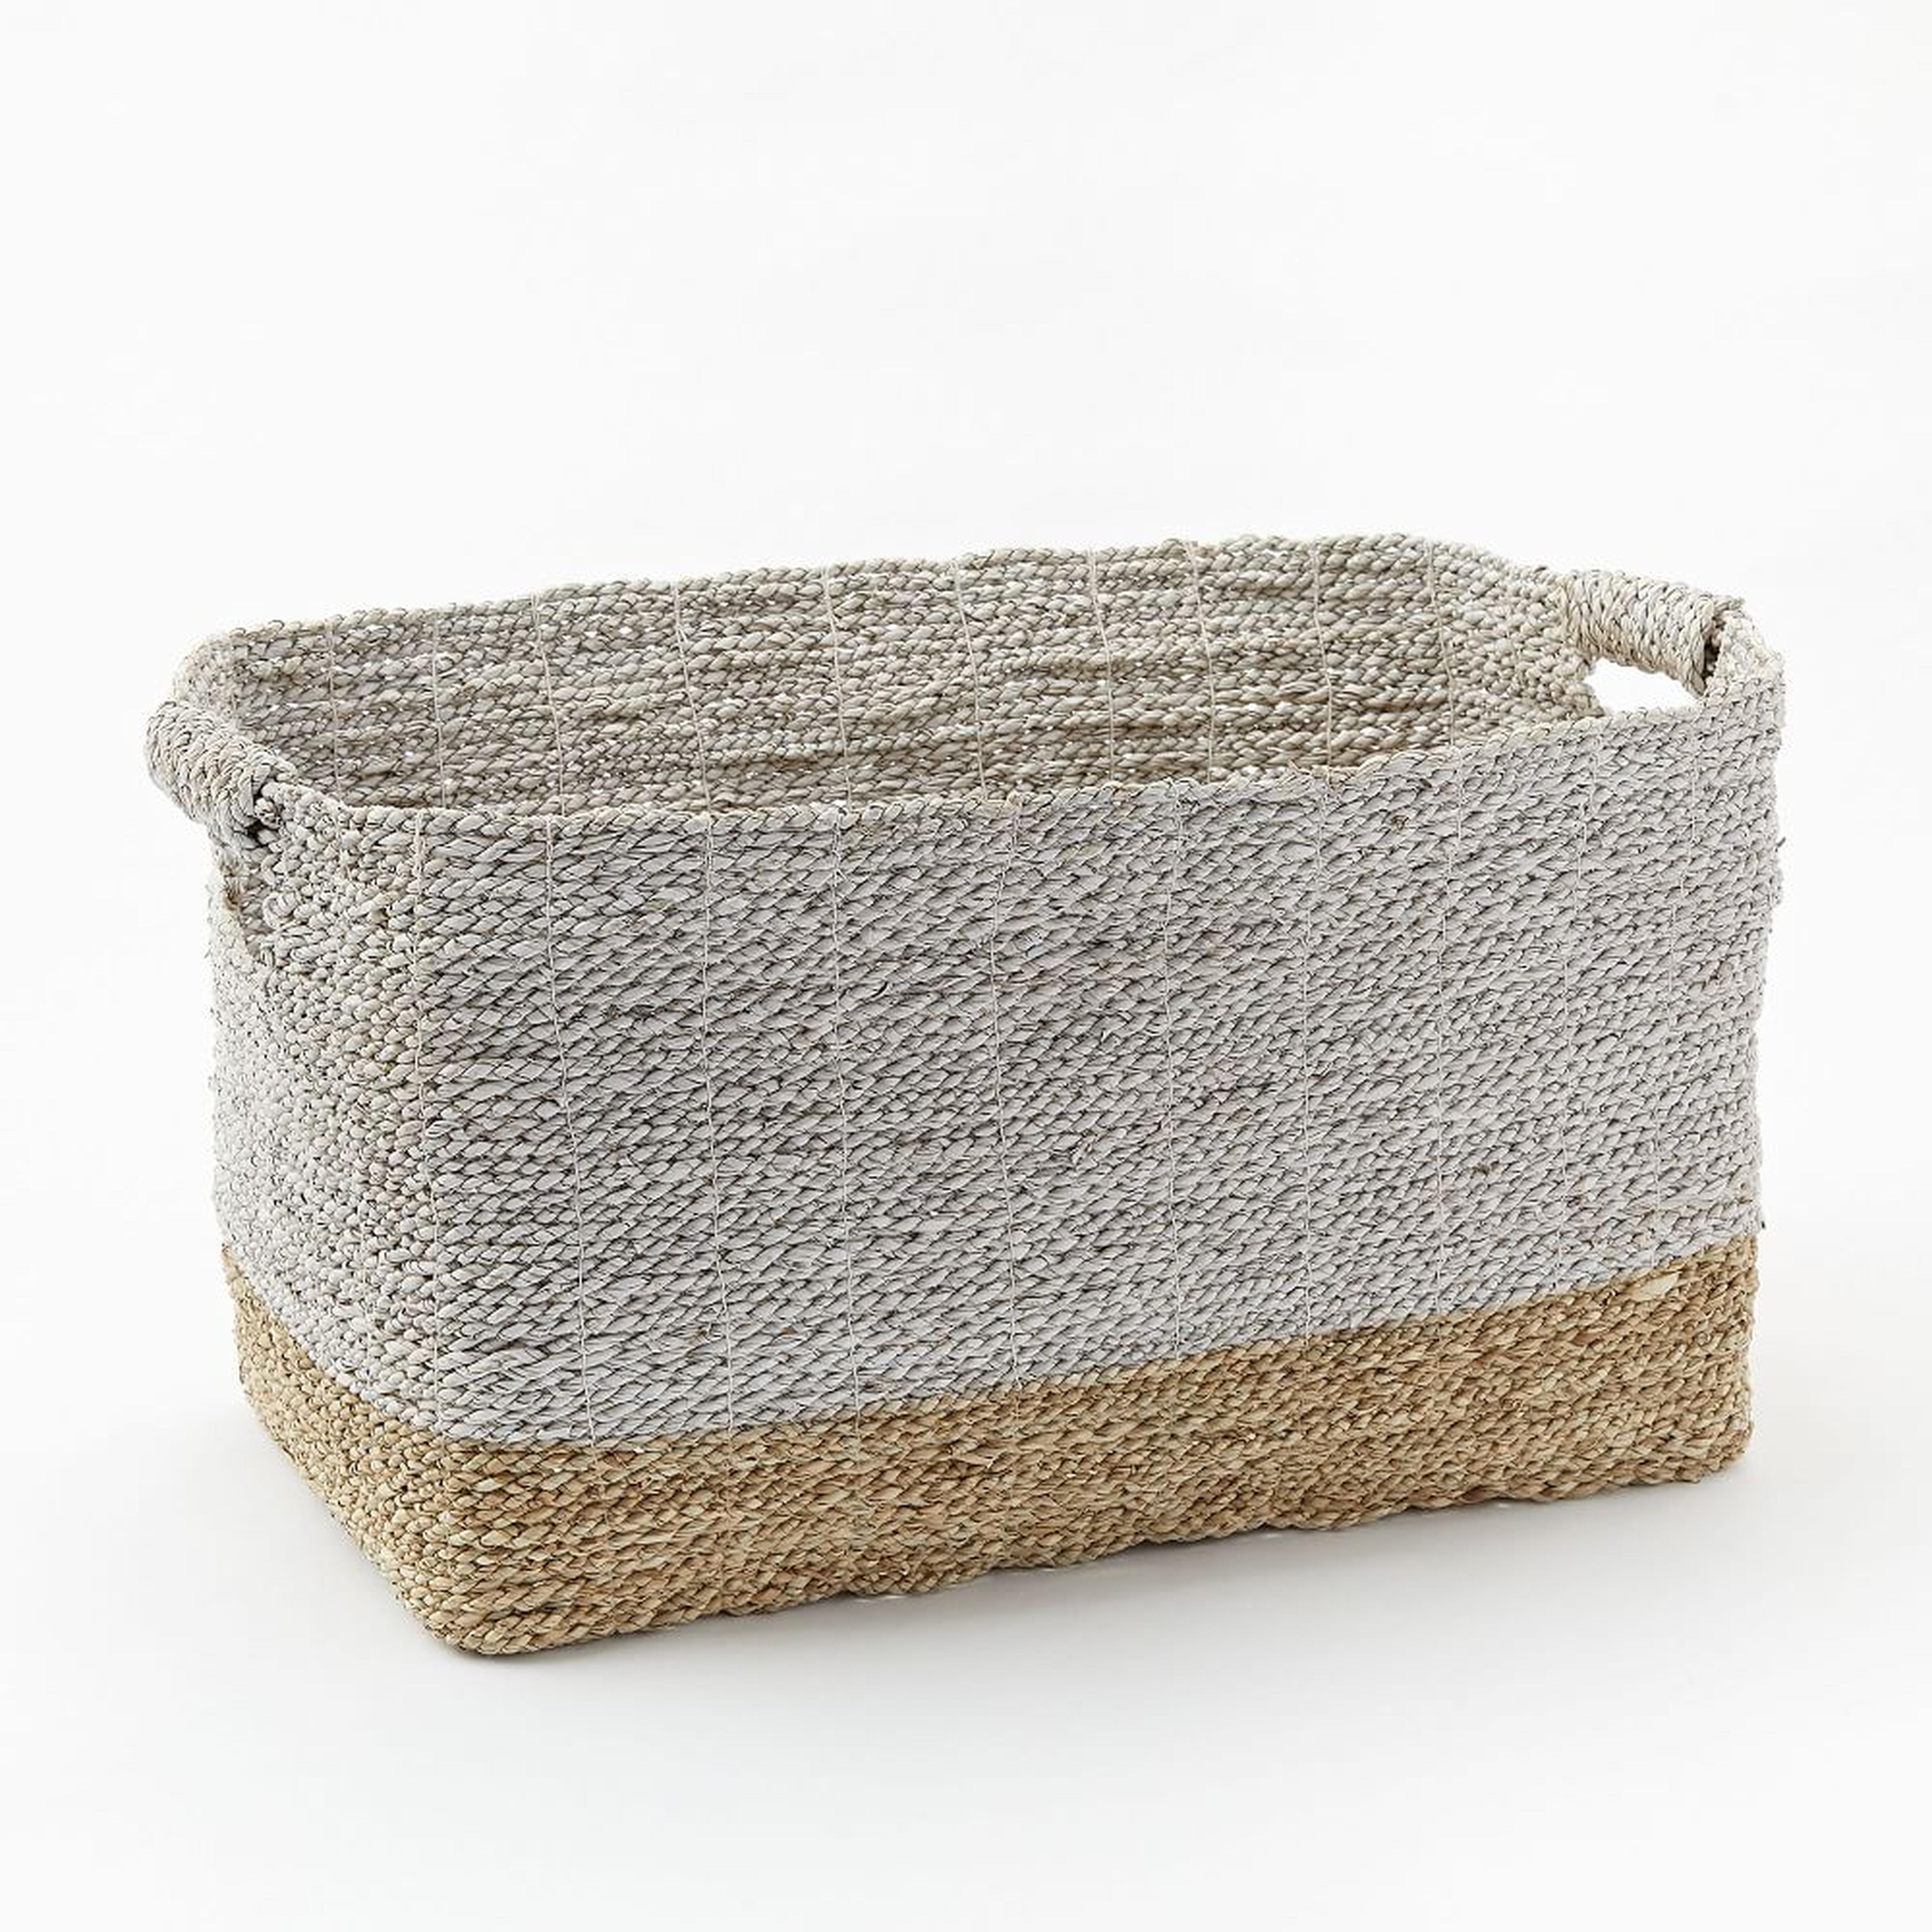 Two-Tone Woven Baskets, Natural/White, Oversized Basket - West Elm